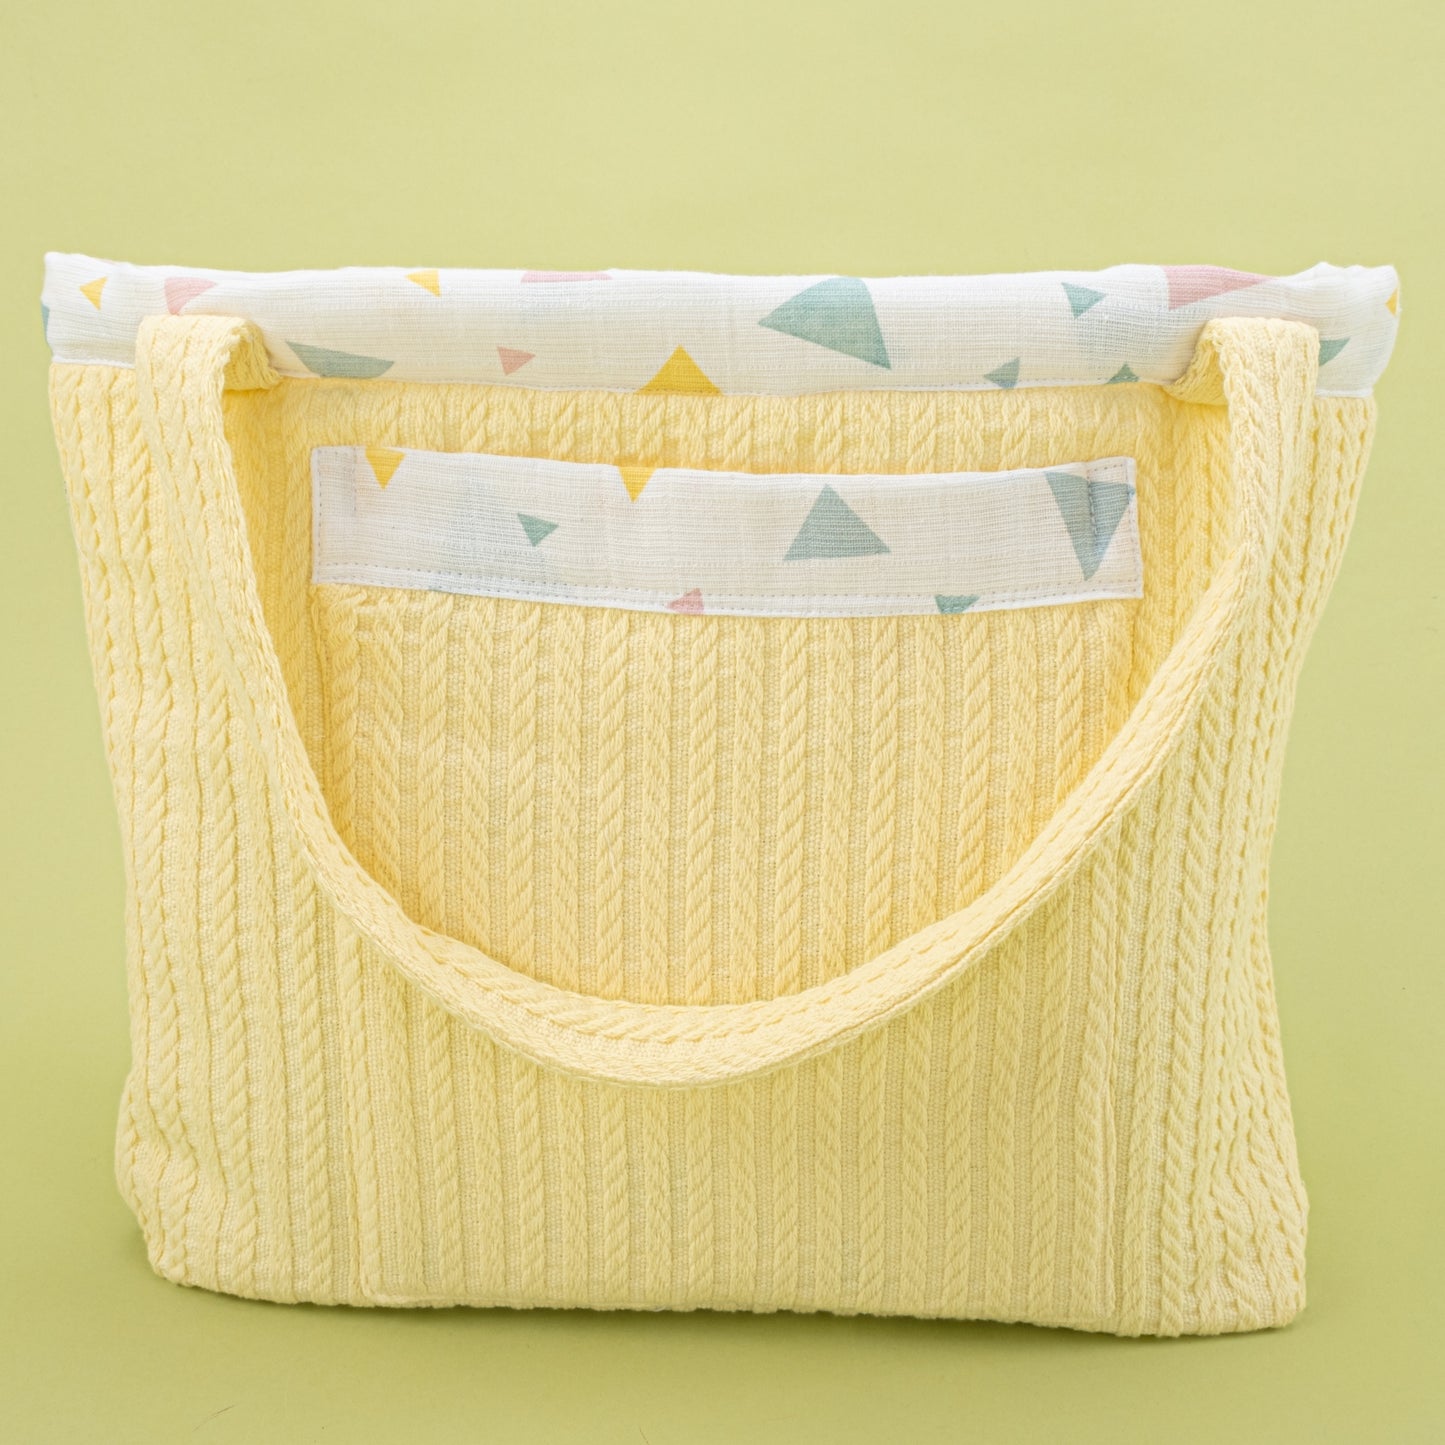 Baby Care Bag - Yellow Braid - Colored Triangles